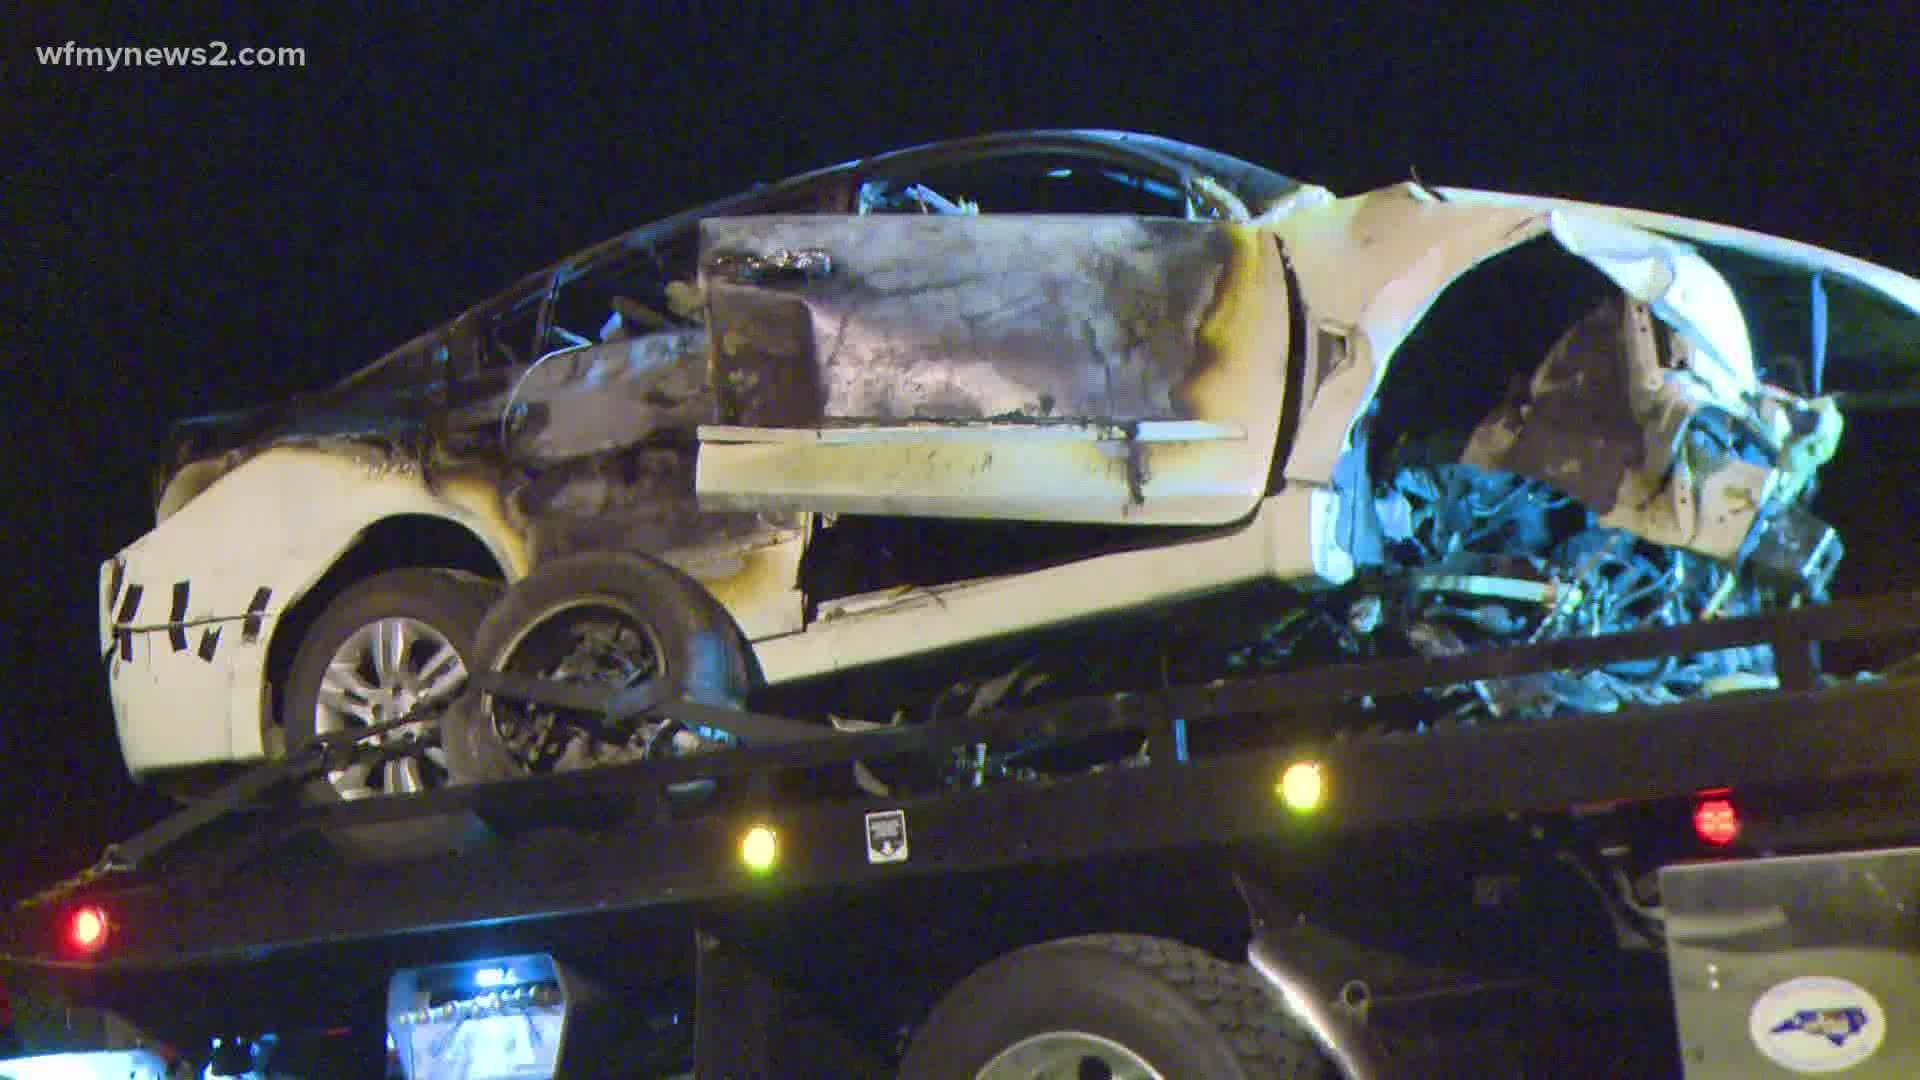 Highway patrol said the driver and the passenger died after the car ran off the road, hit a ditch and caught fire.